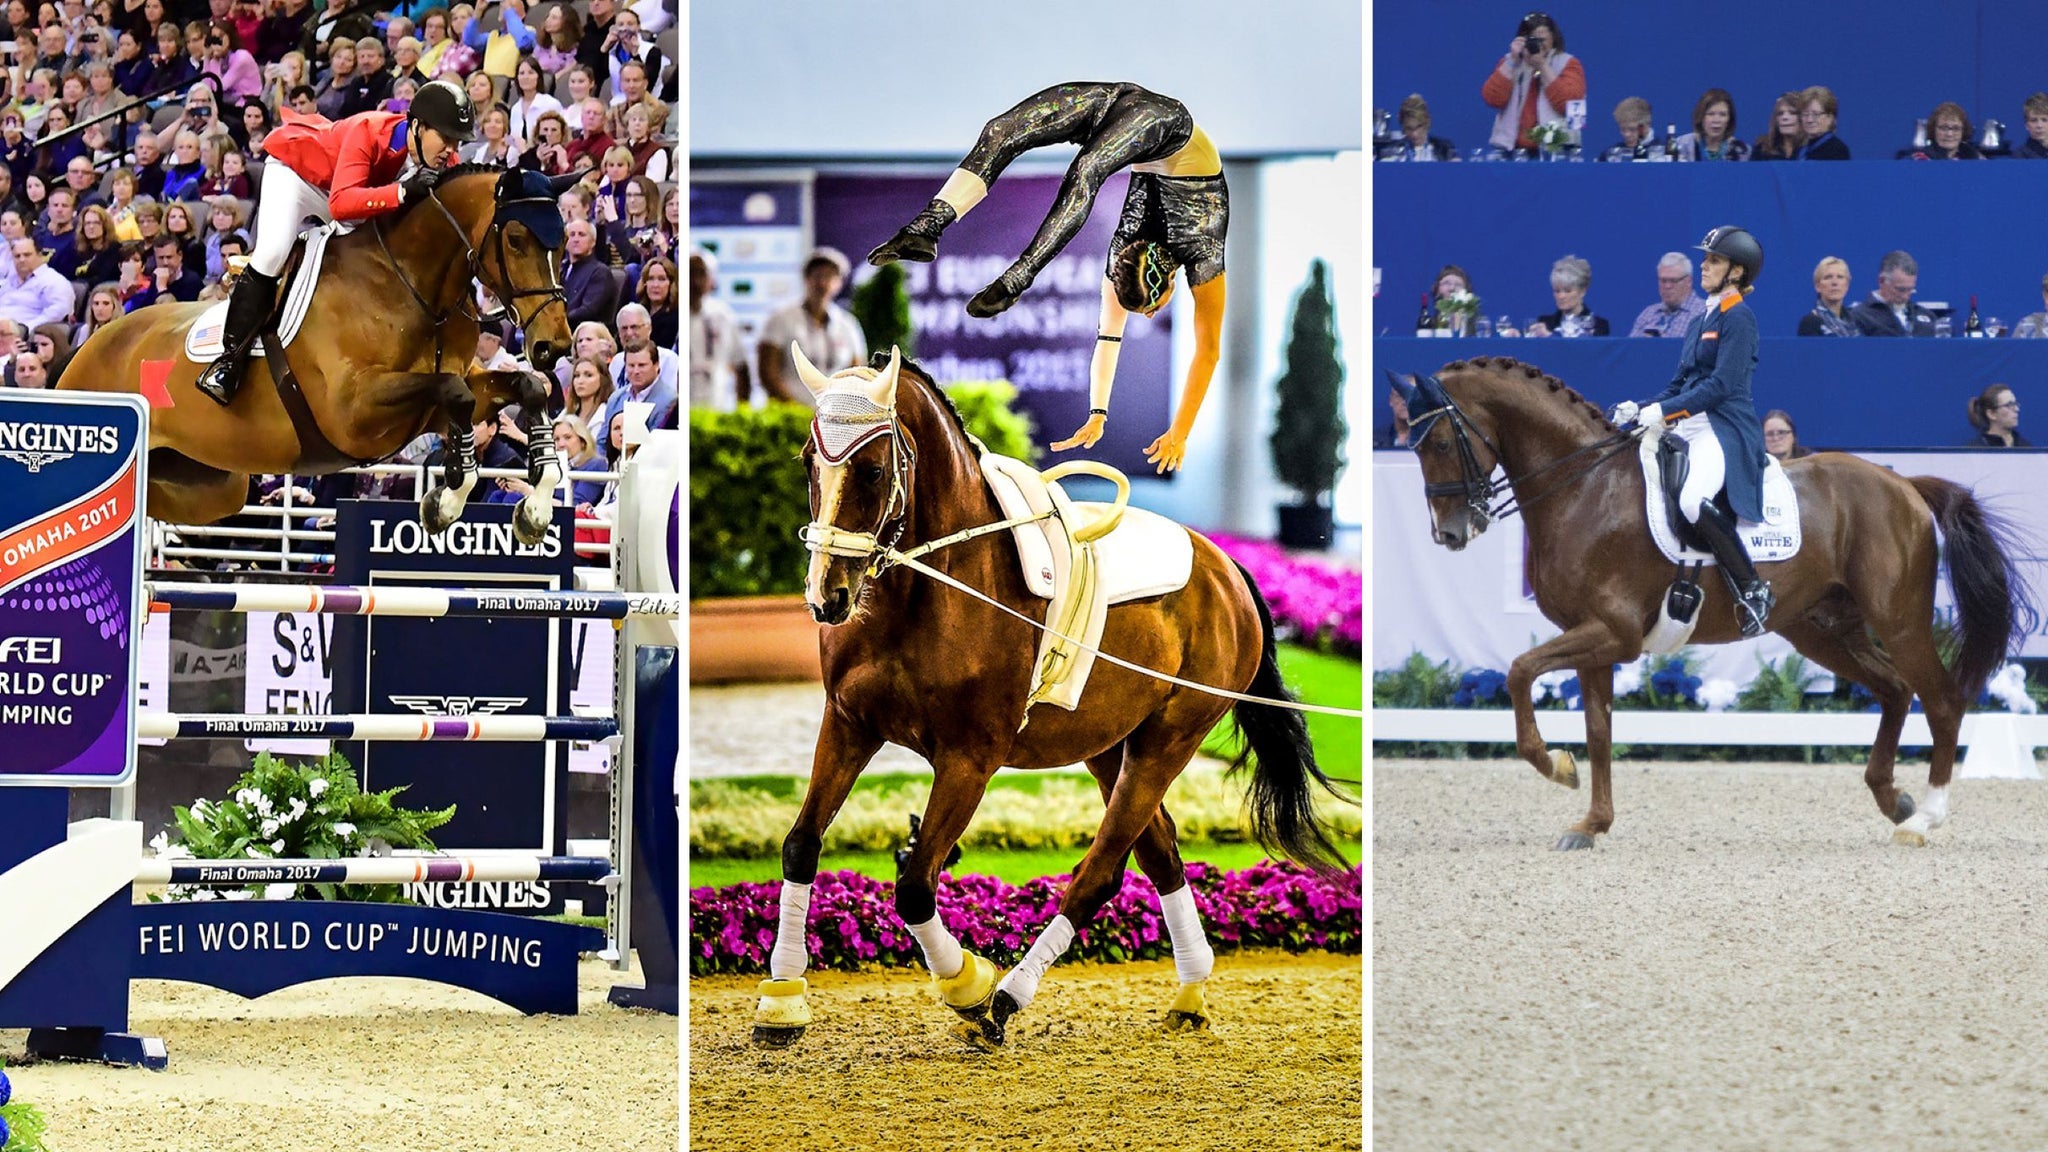 Round 2 – Longines FEI Jumping World Cup(TM) Finals